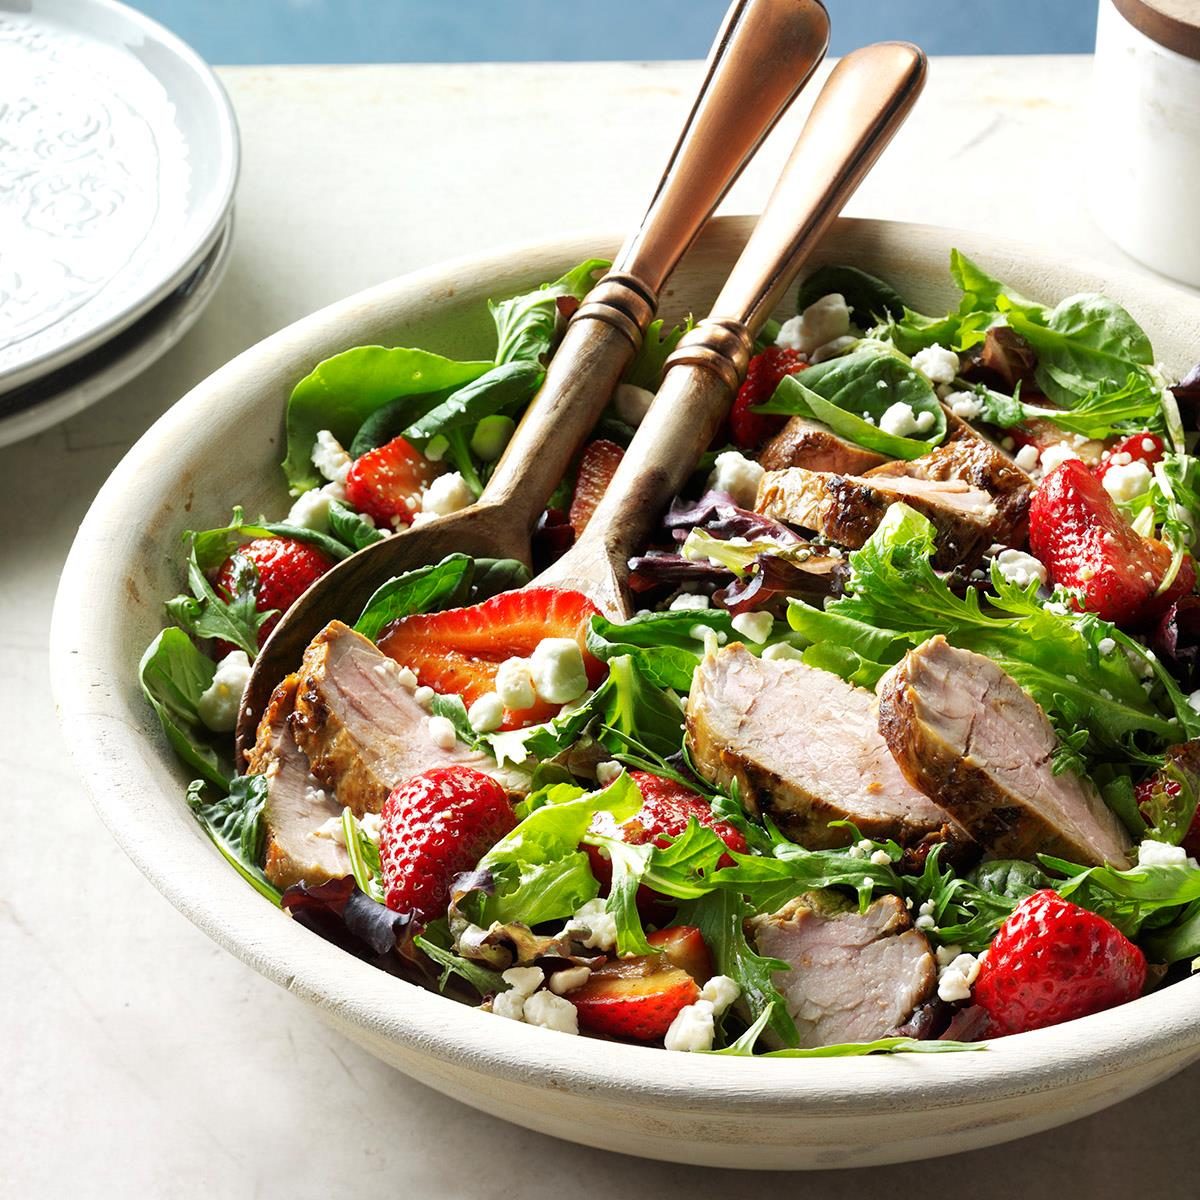 August 5: Pork and Balsamic Strawberry Salad